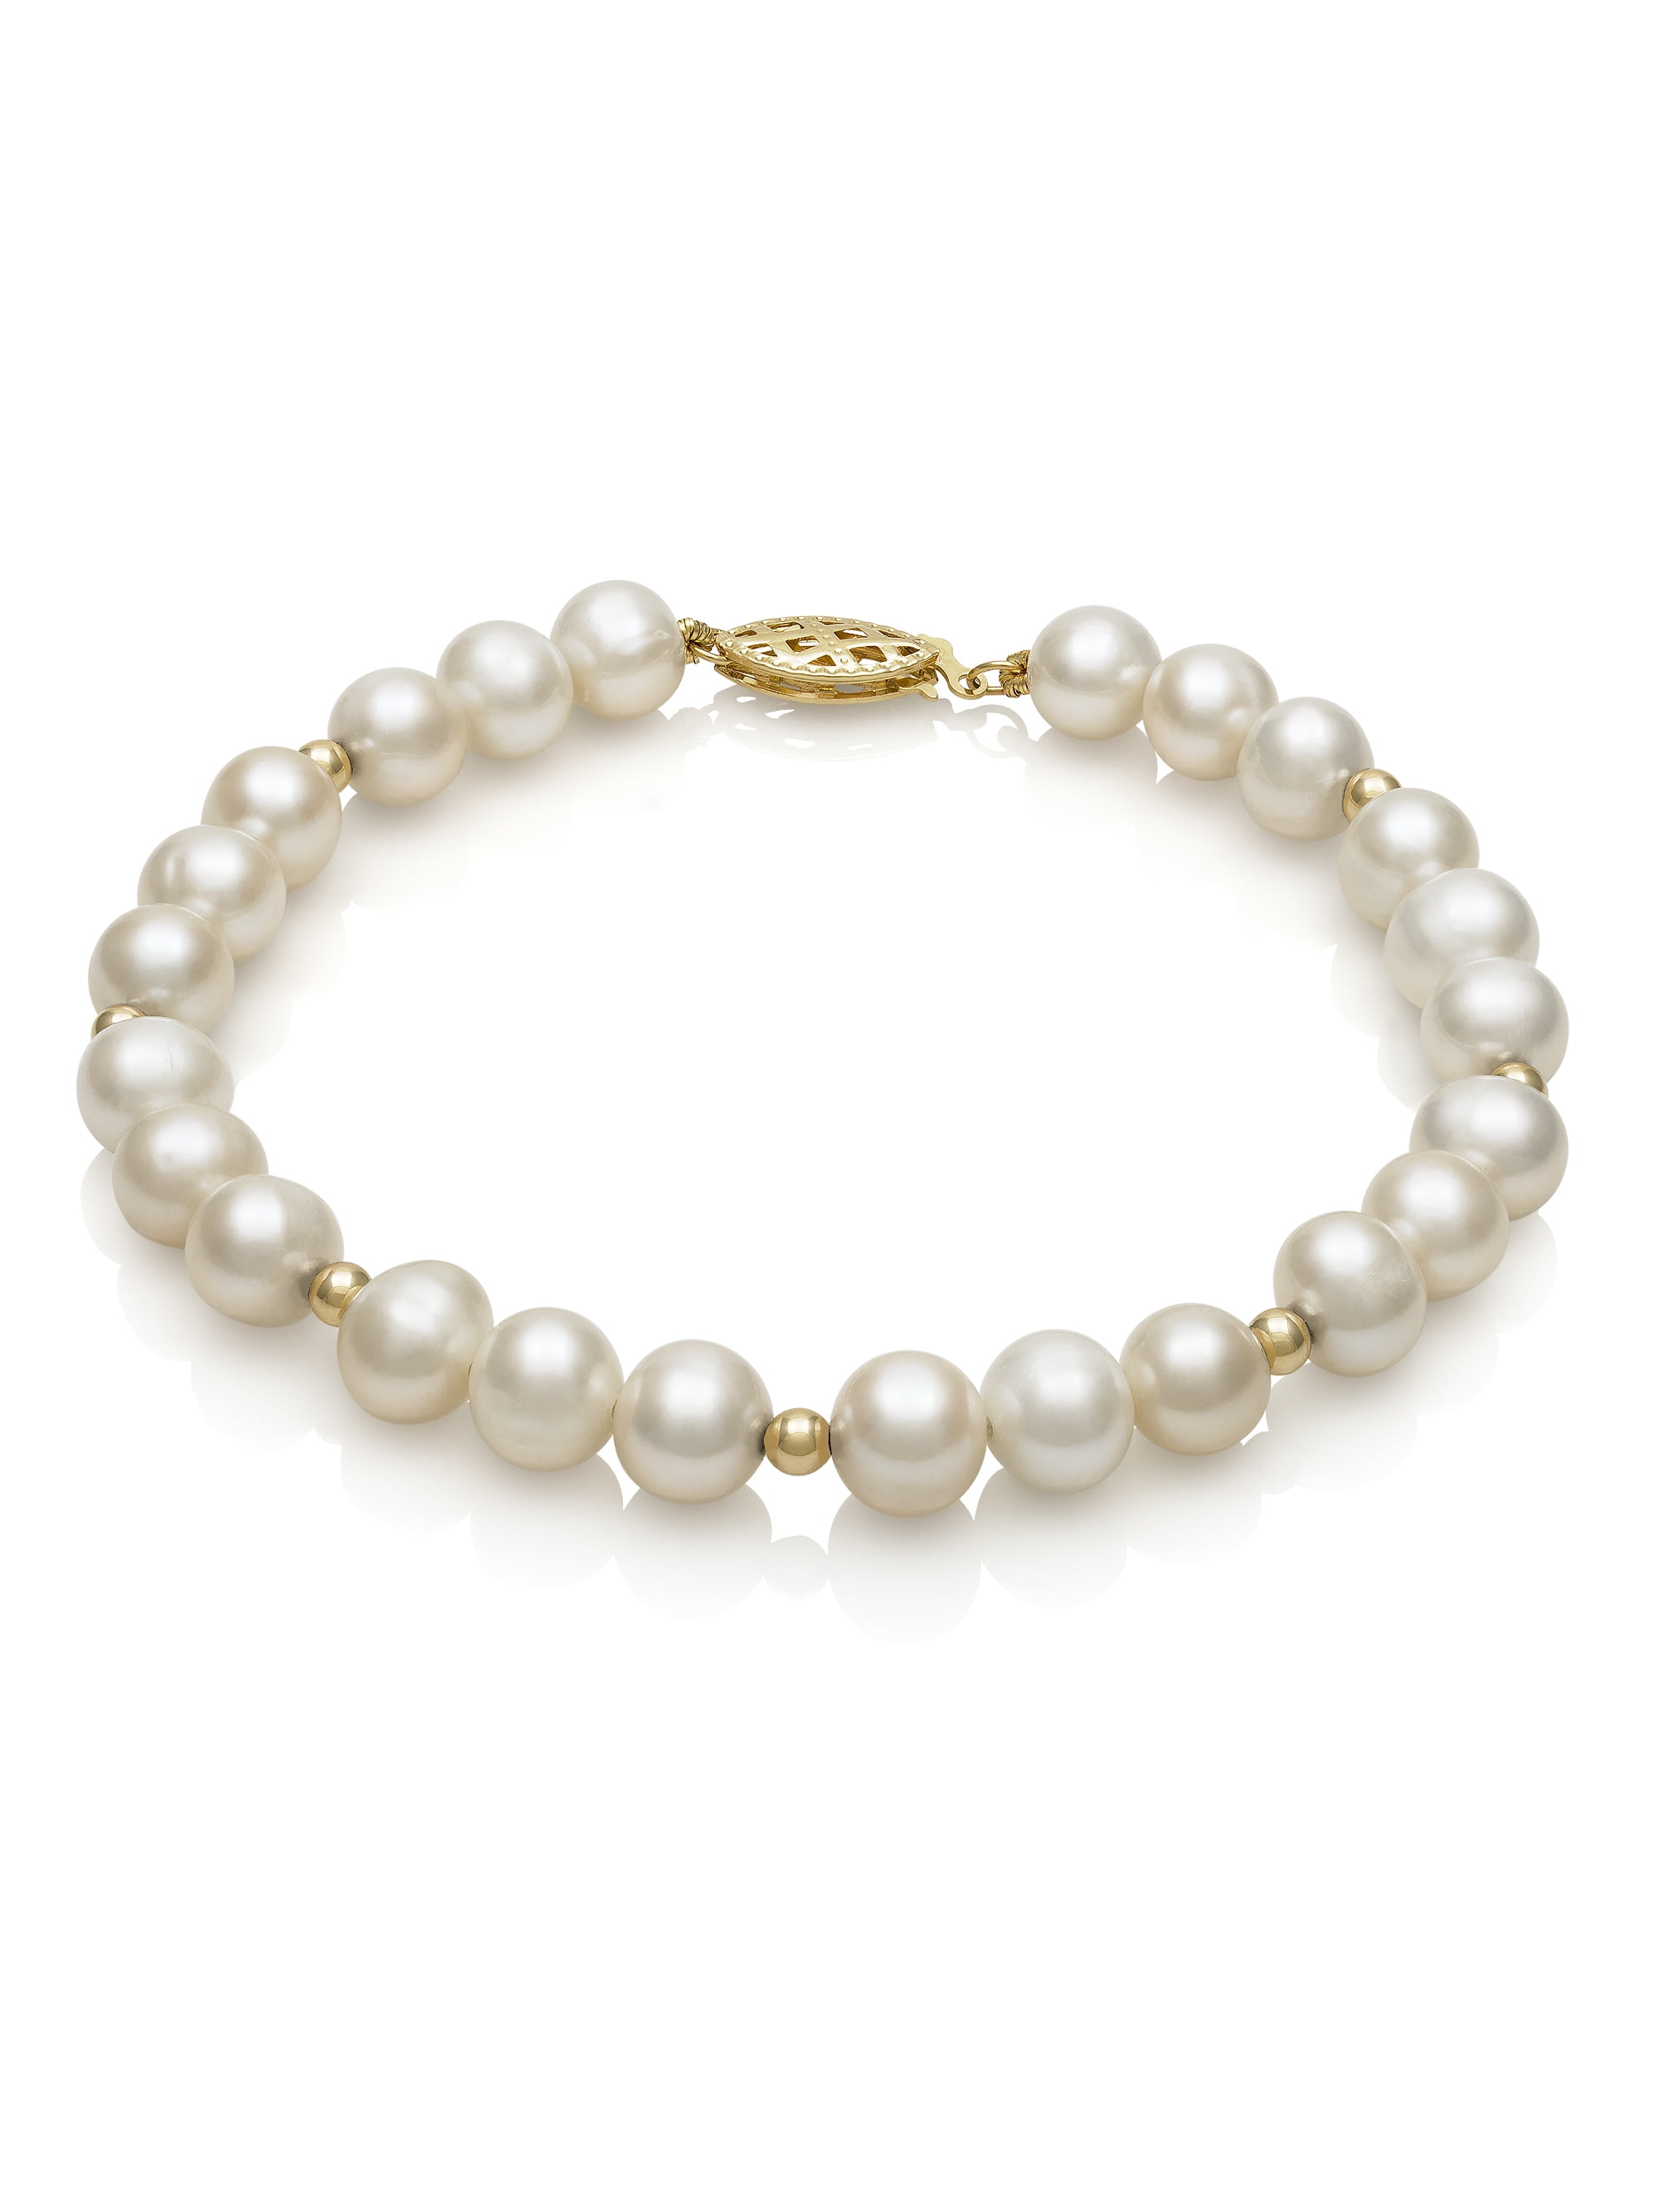 Freshwater White Pearl Bracelet 14k Yellow Gold Clasp 7 12 Inches Long